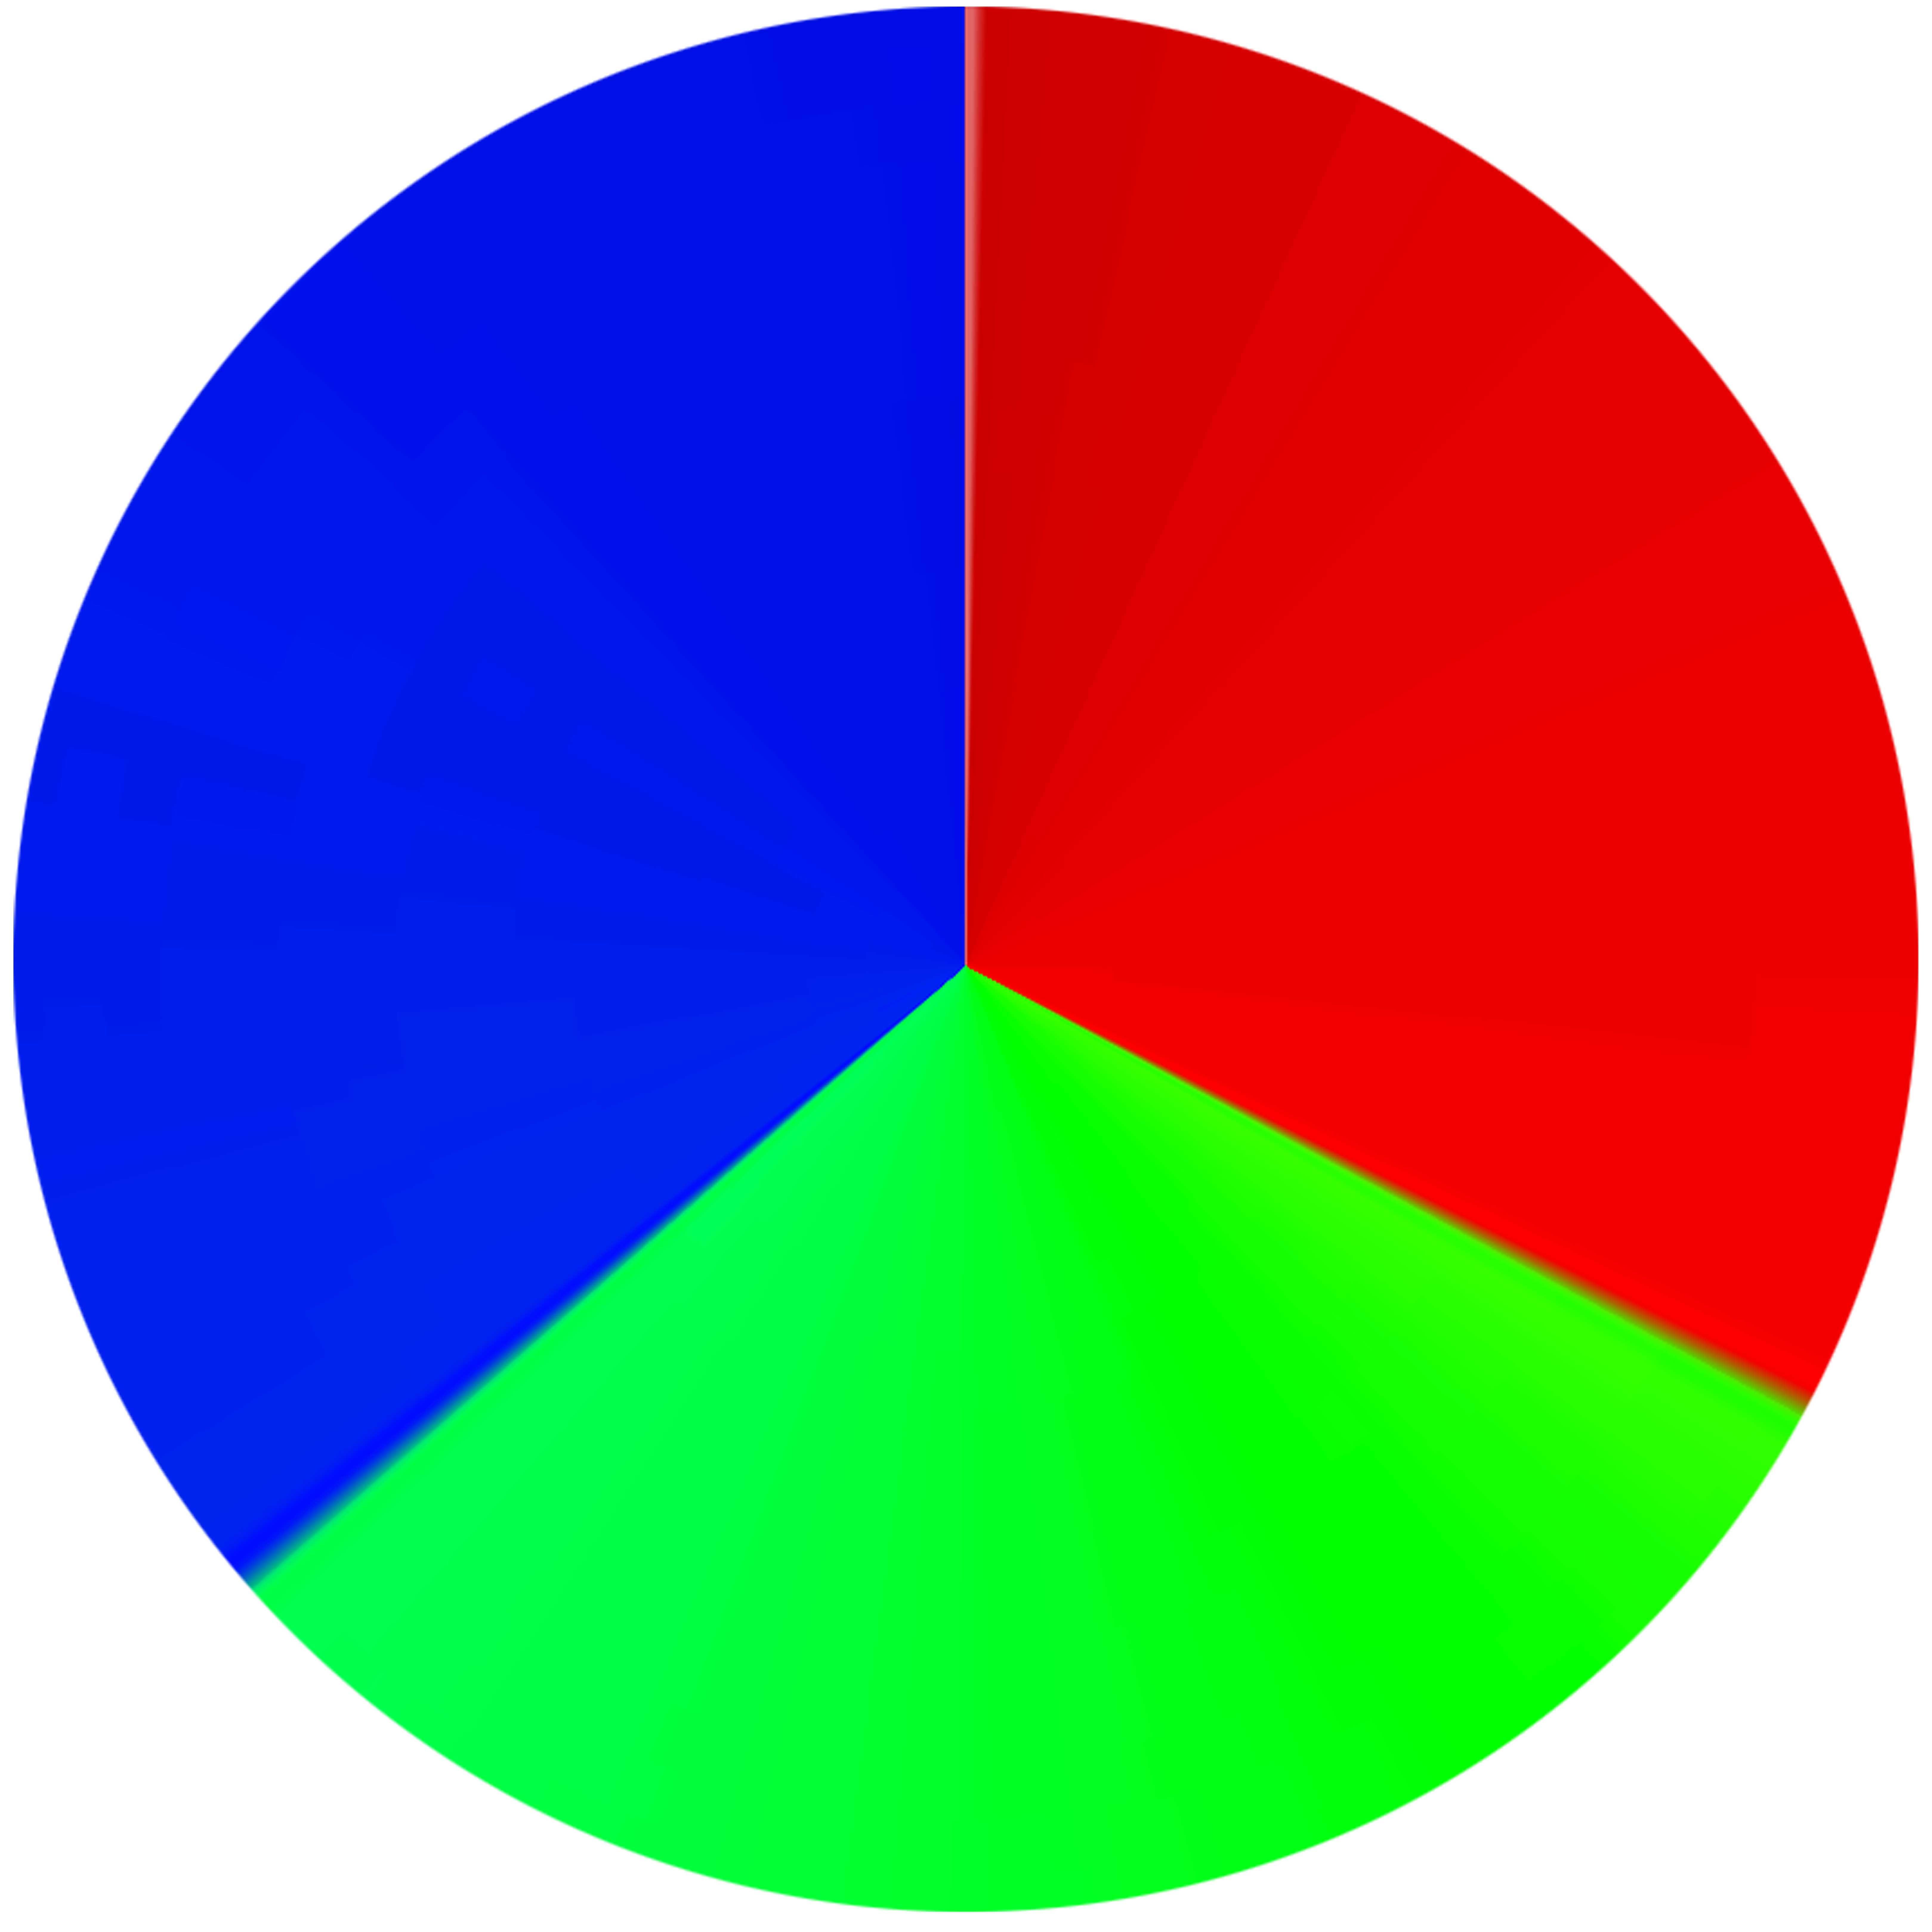 Blue Green Red Logo - Newtons Color Wheel building one & operating one